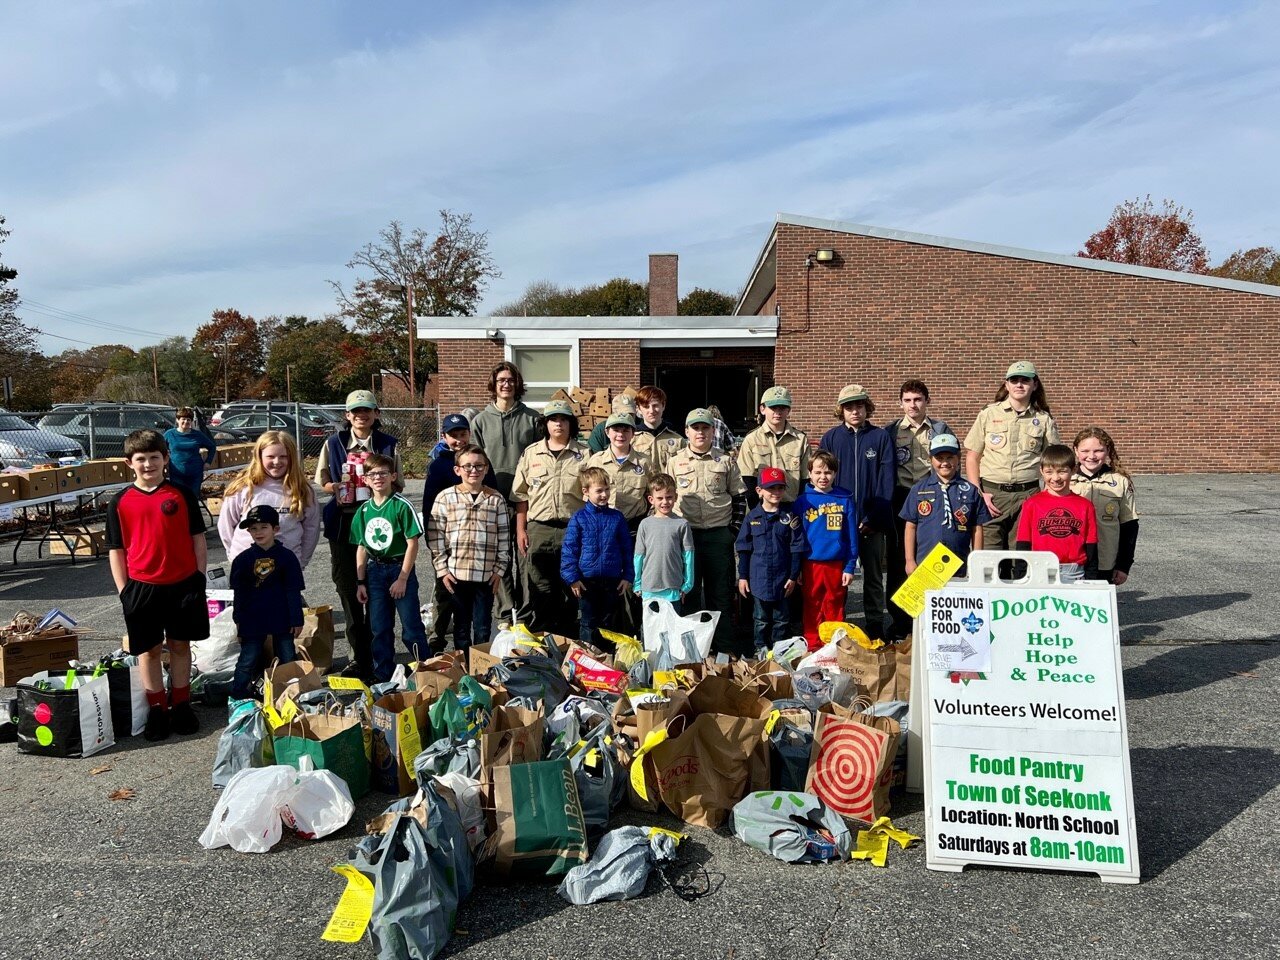 Scouts and parents from BSA Troops 1 & 9, and Cub Scout Pack 88, worked hard to collect over 8,000 pounds of food for Doorways Food Pantry to supplement holiday tables